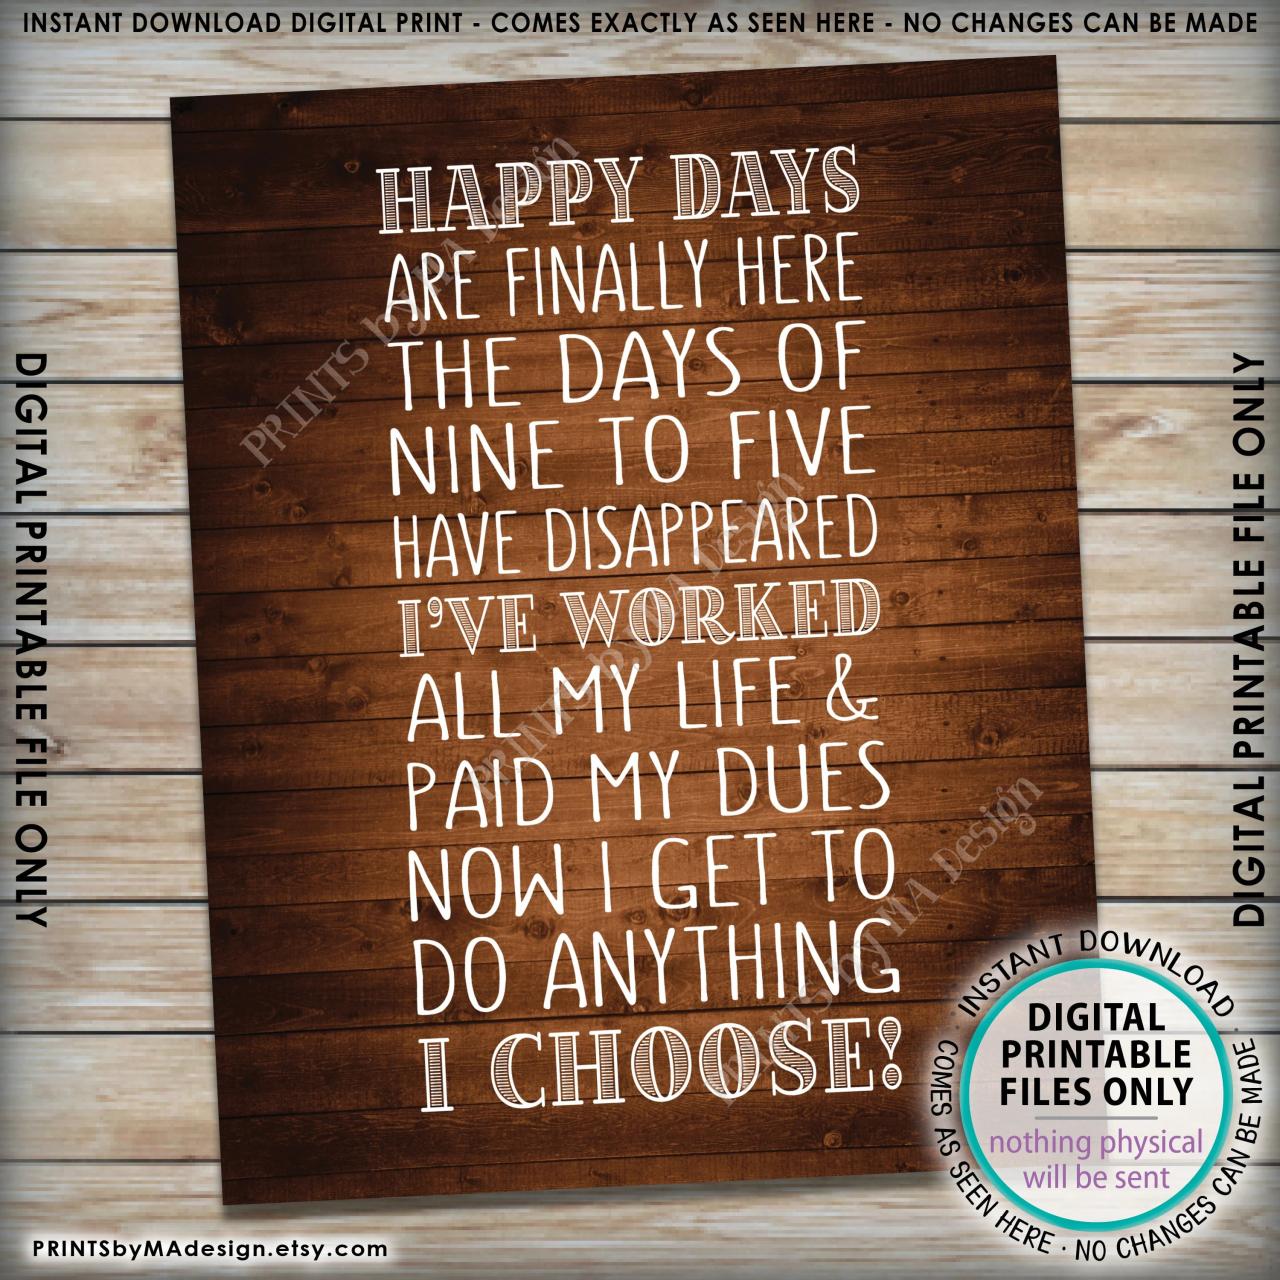 Retirement Poem, Fun Retirement Party Ideas, Happy Days are Finally